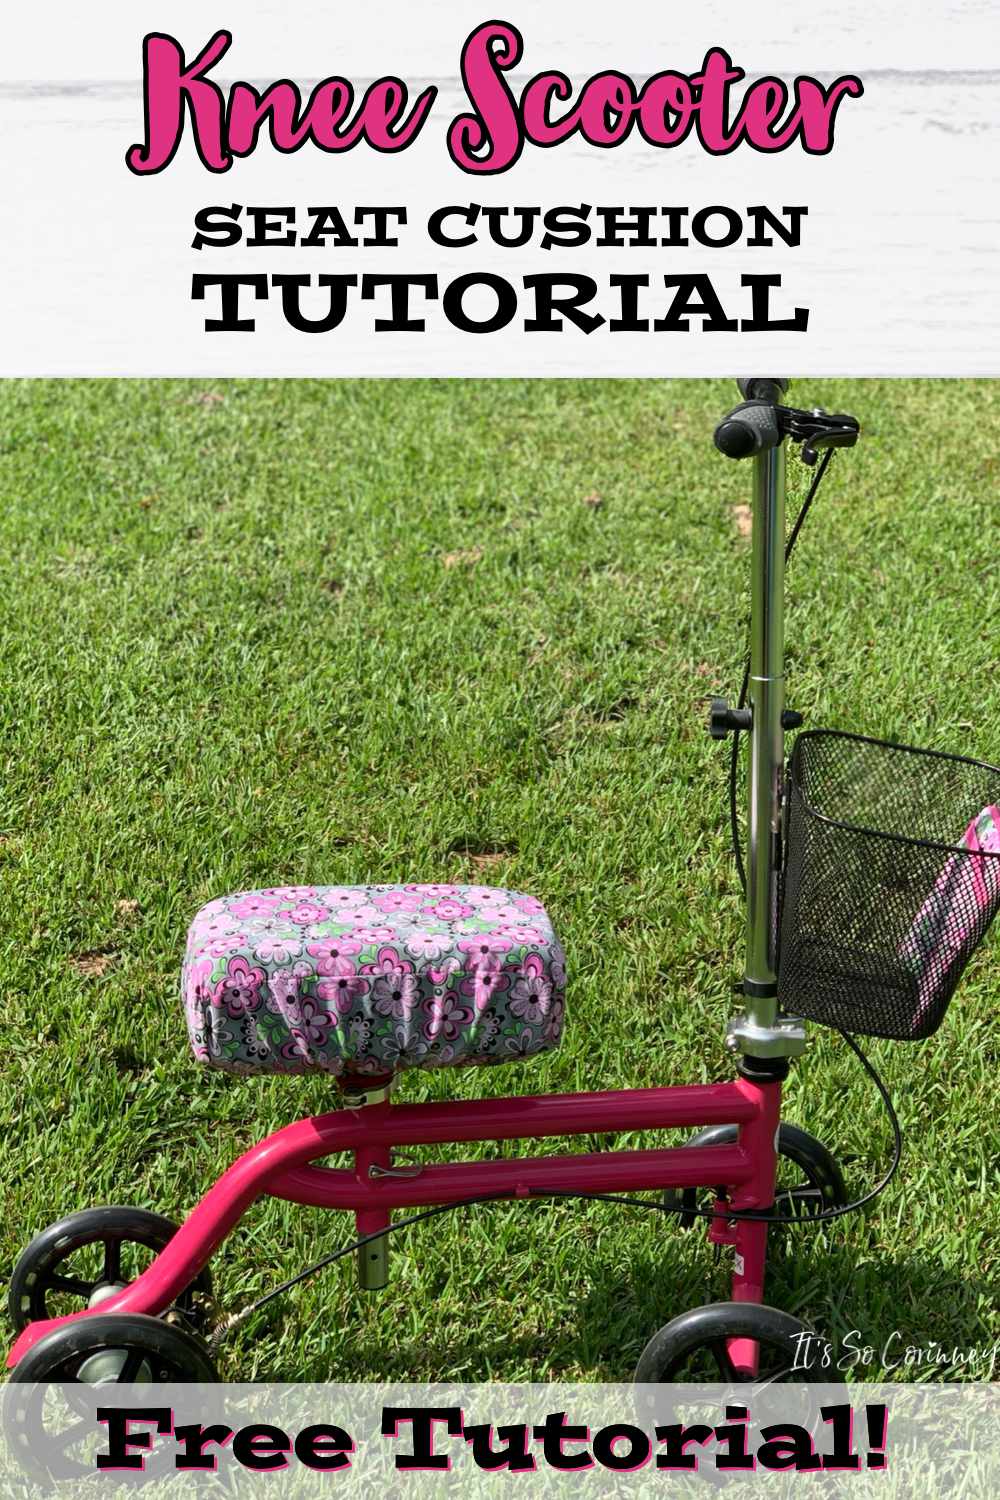 Knee Scooter Seat Cushion Tutorial